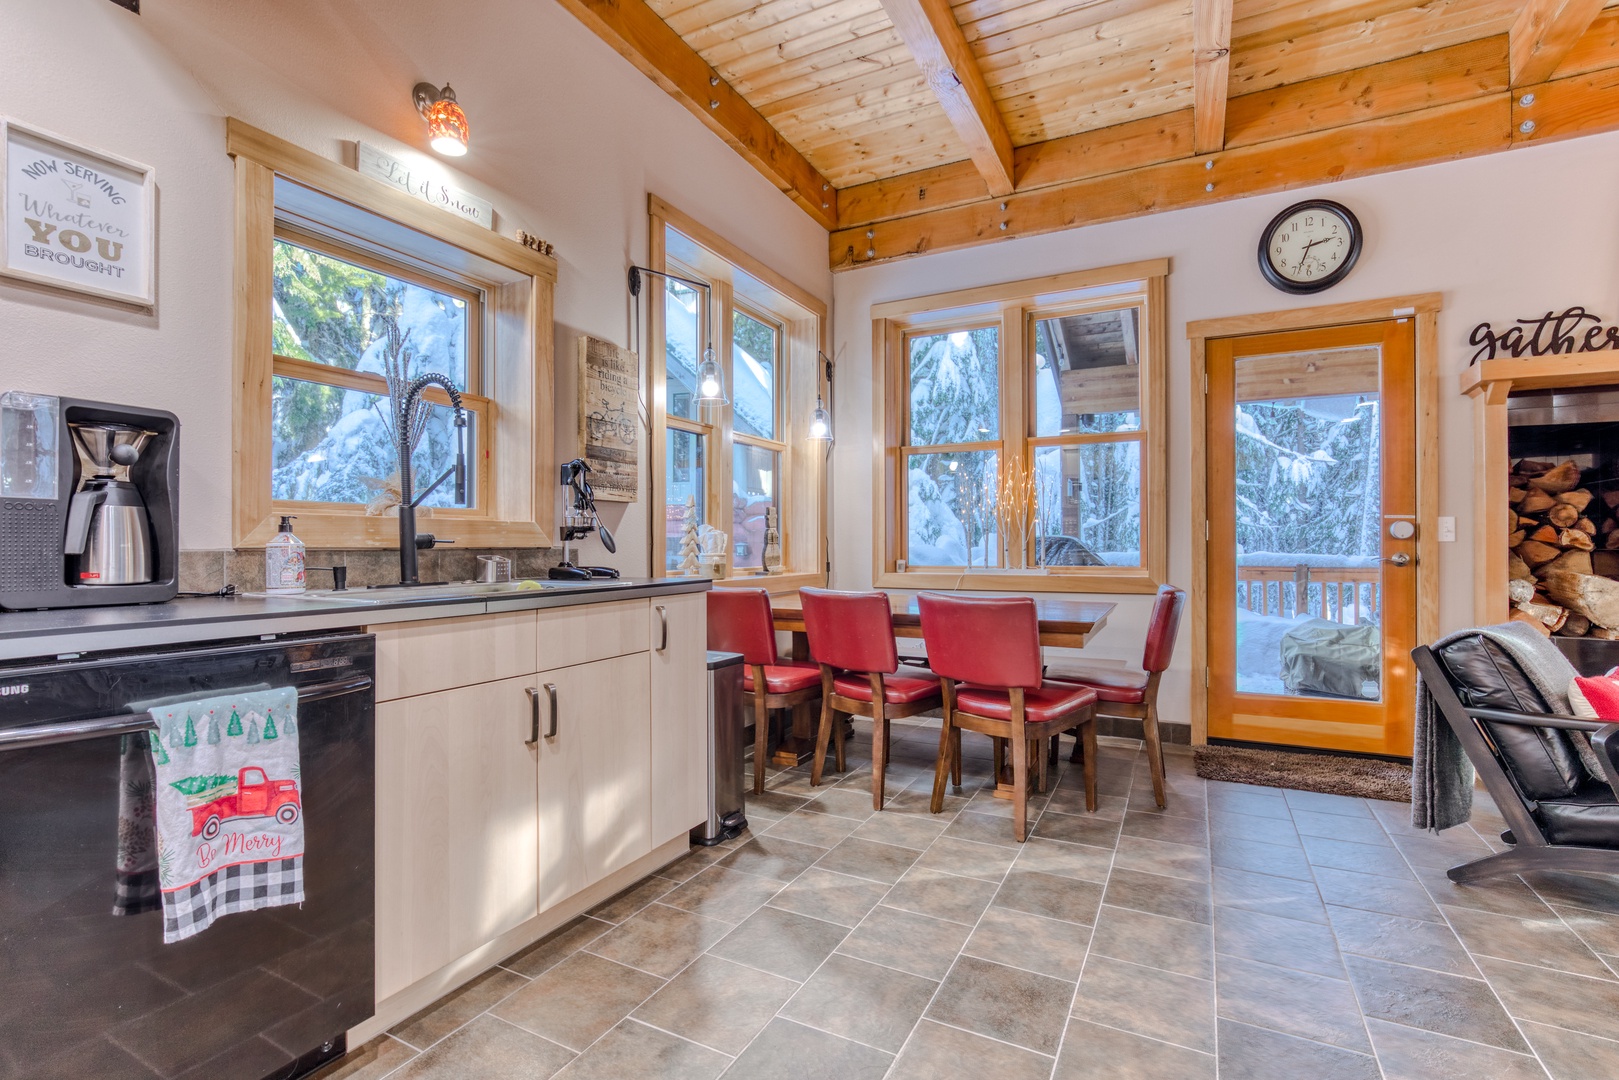 Government Camp Vacation Rentals, Glade Trail Lodge - kitchen and dining area